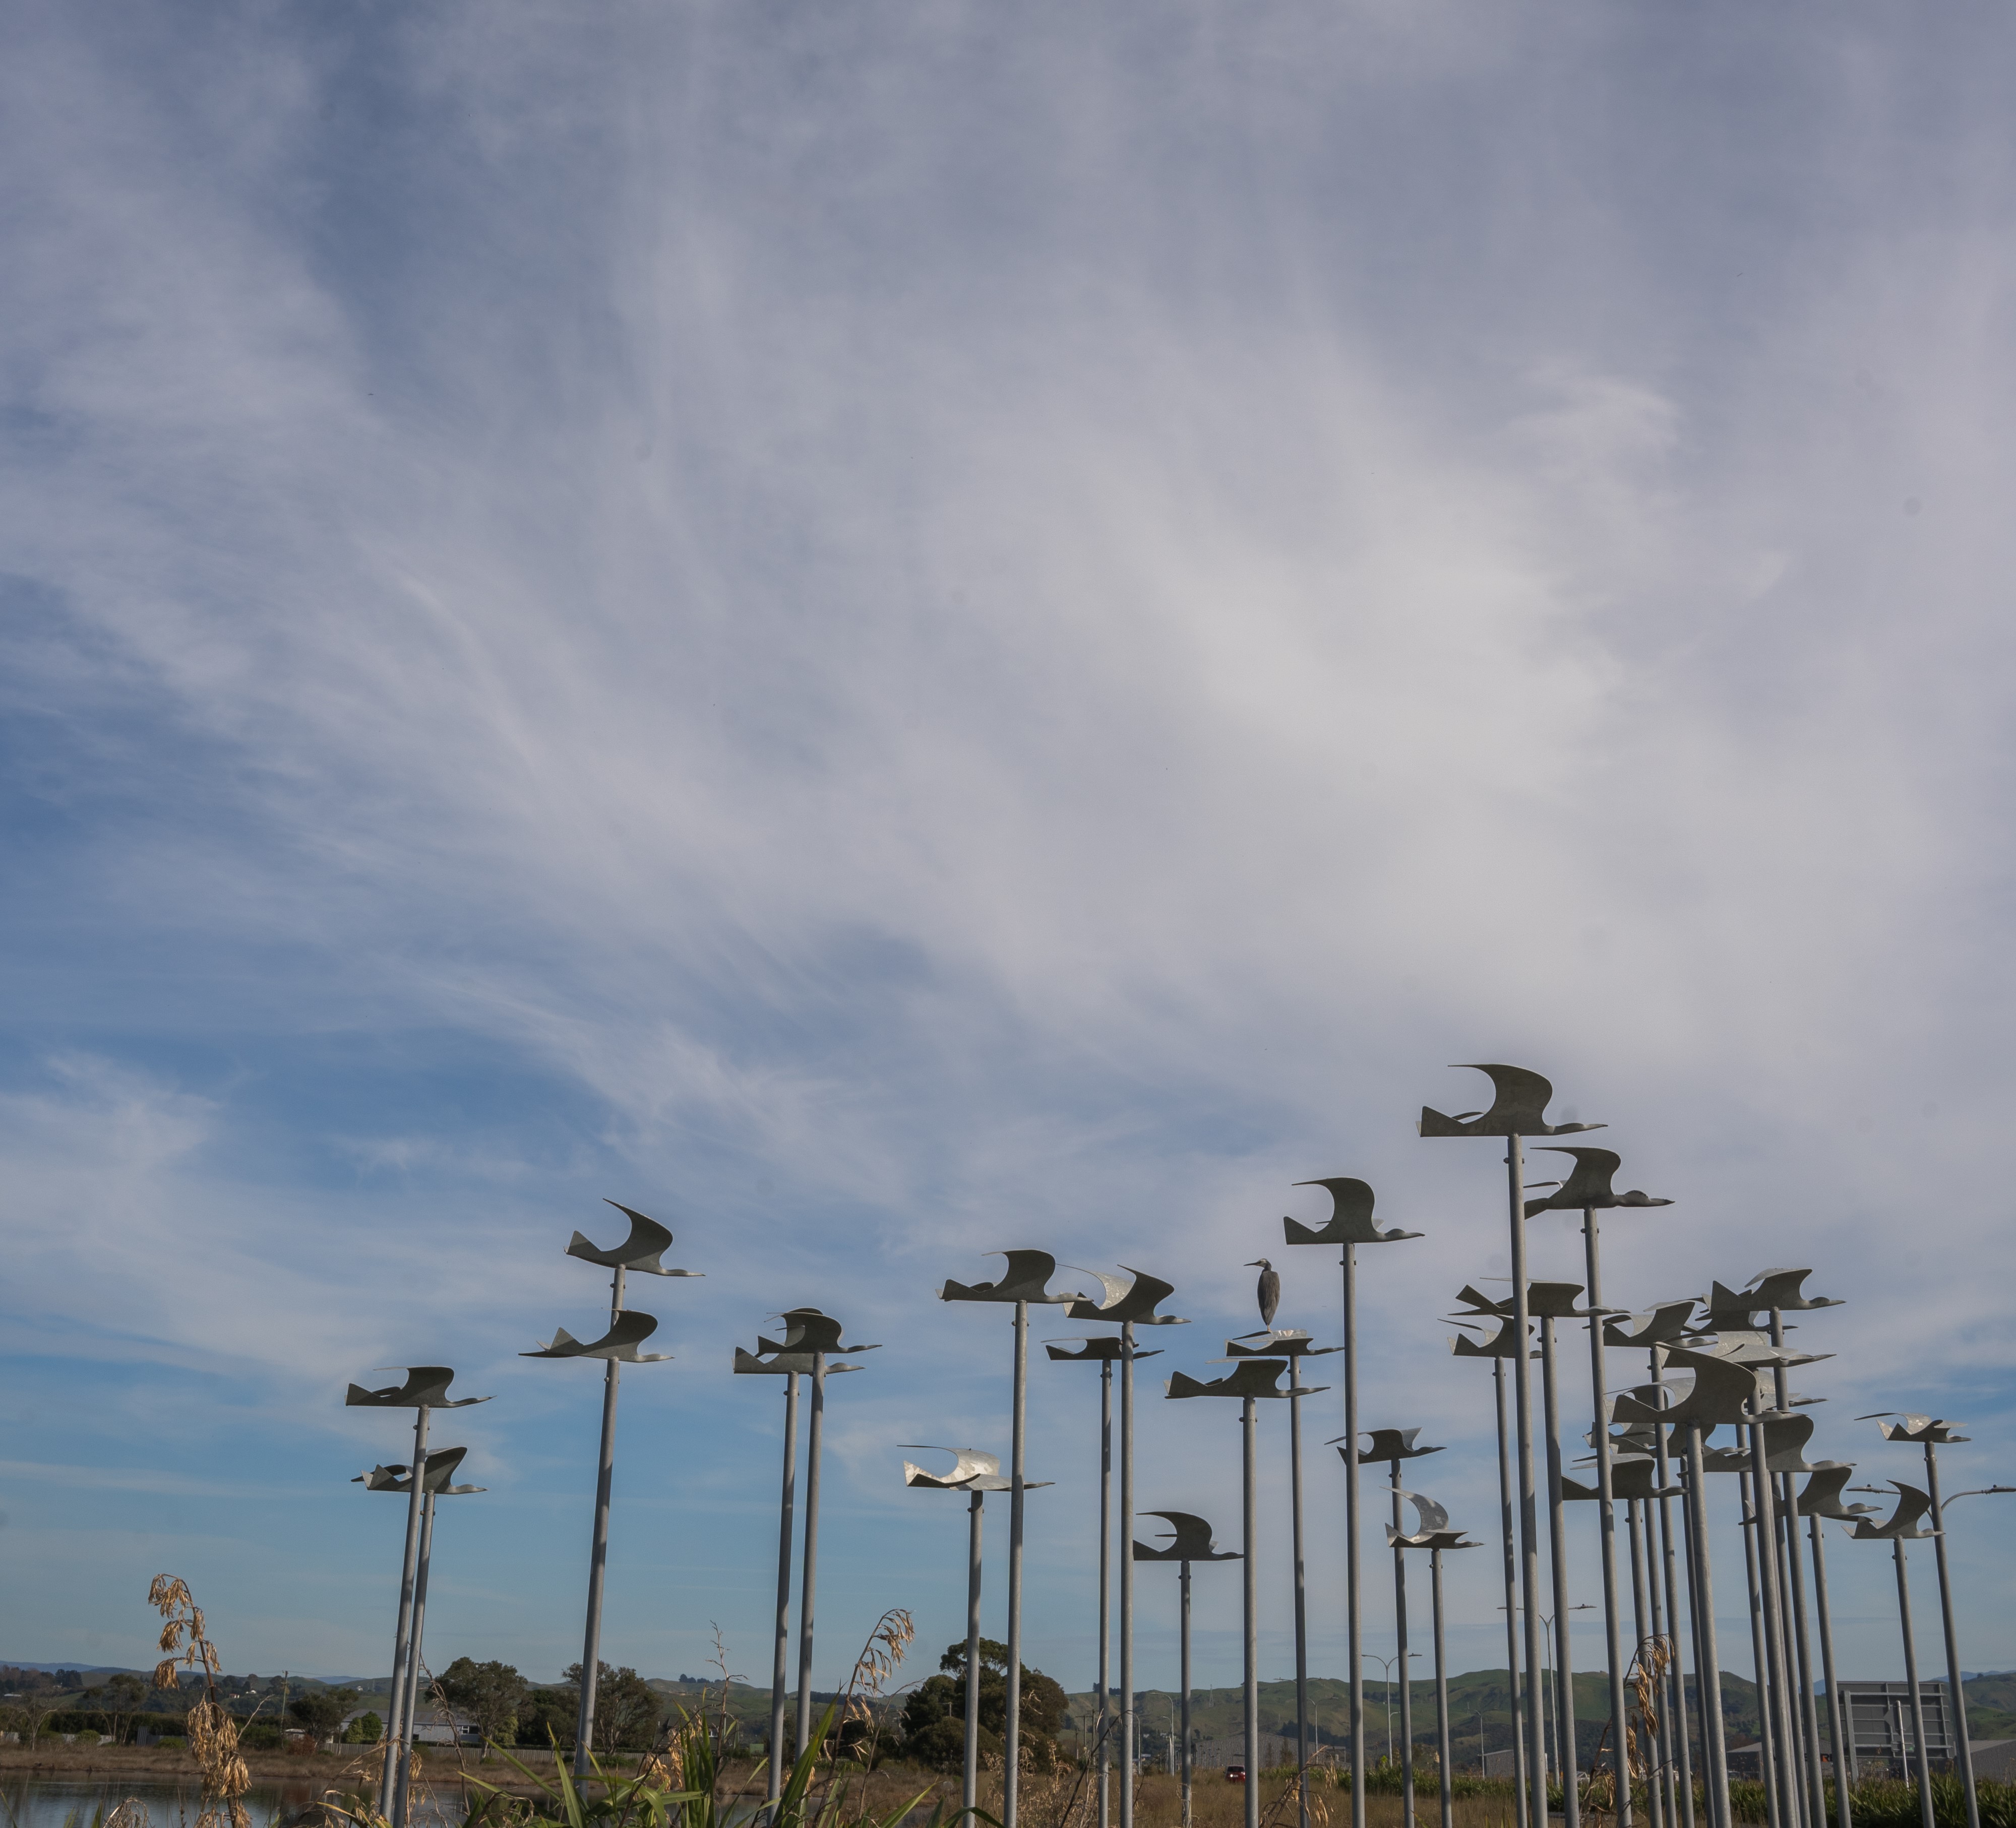 Flock of metal bird sculptures being held in the air by metal poles located close to Napier Airport.